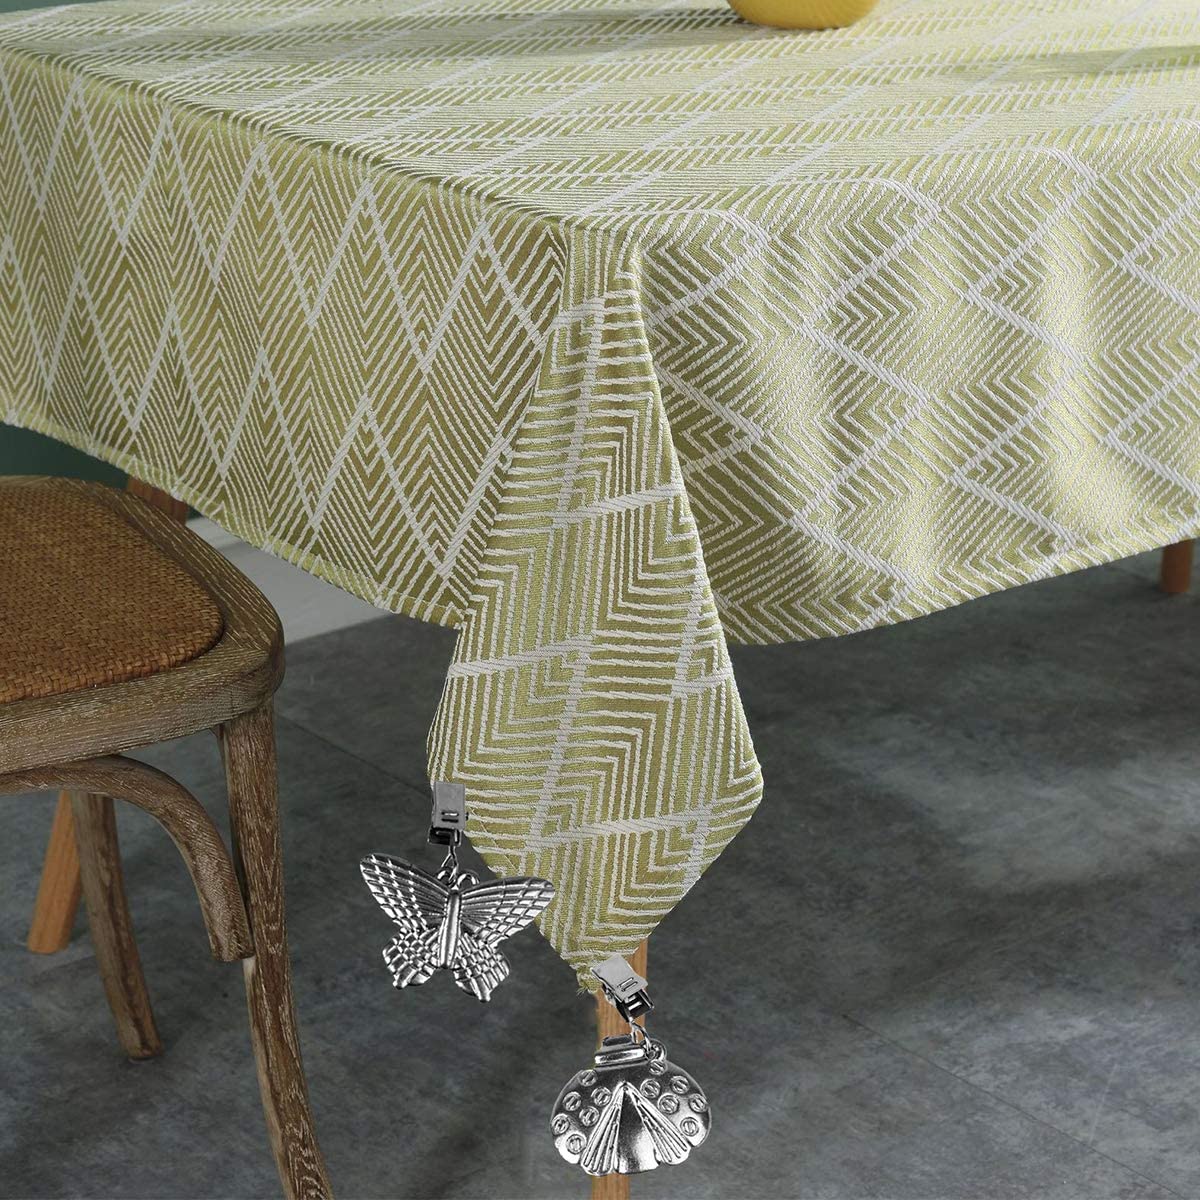 Sunflower Tablecloth Weights with Metal Clips for Outdoor Garden Party Picnic Table Covers